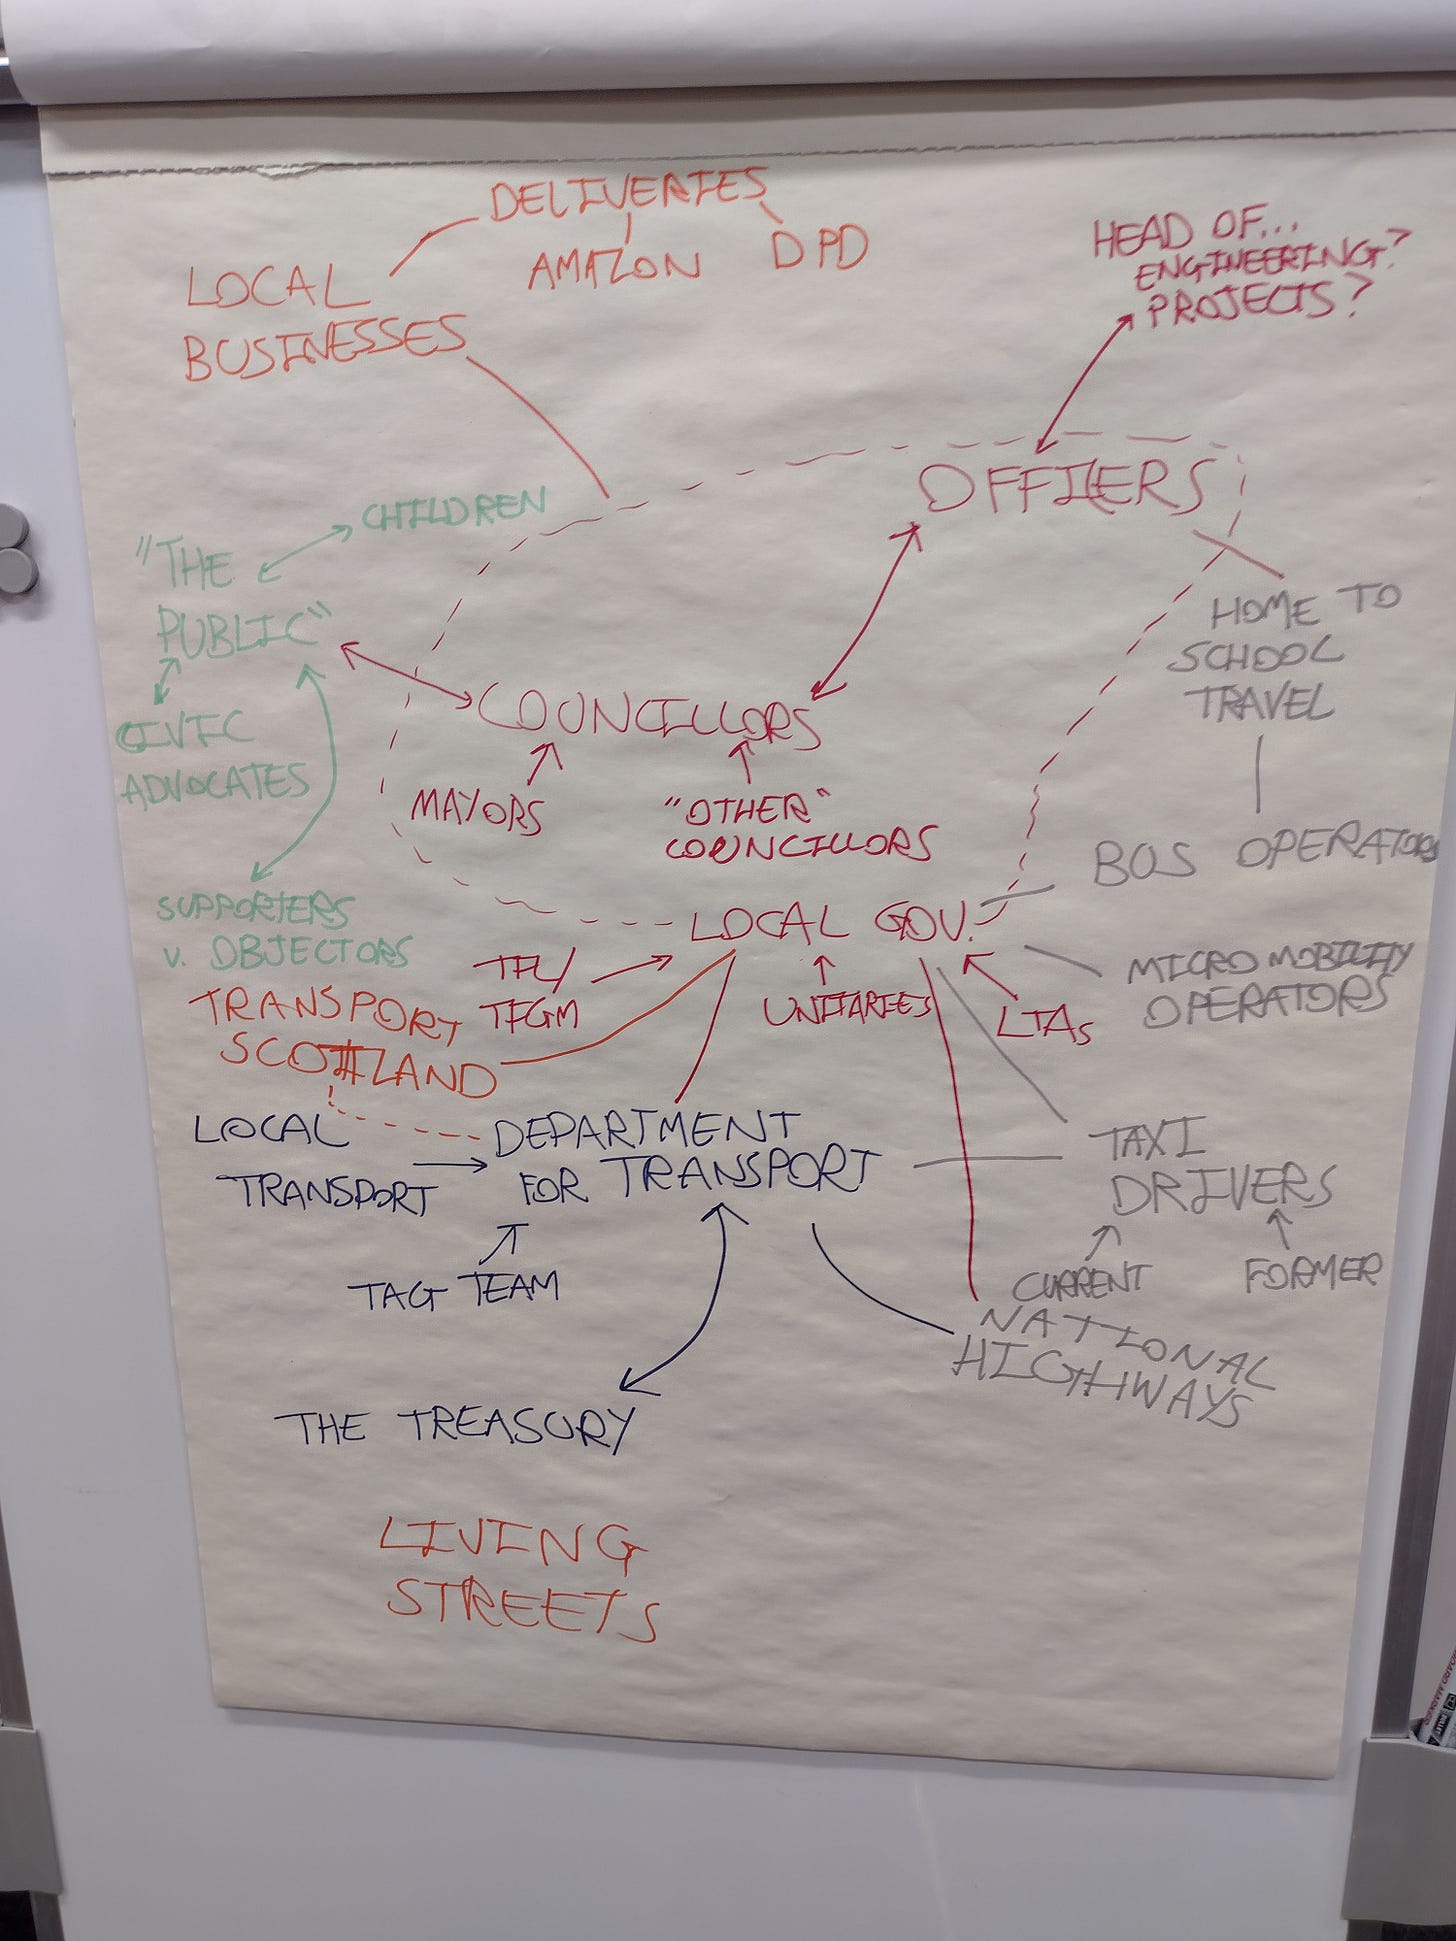 A social map generated at Mobility Camp, showing how different parties like DfT work with others to achieve change